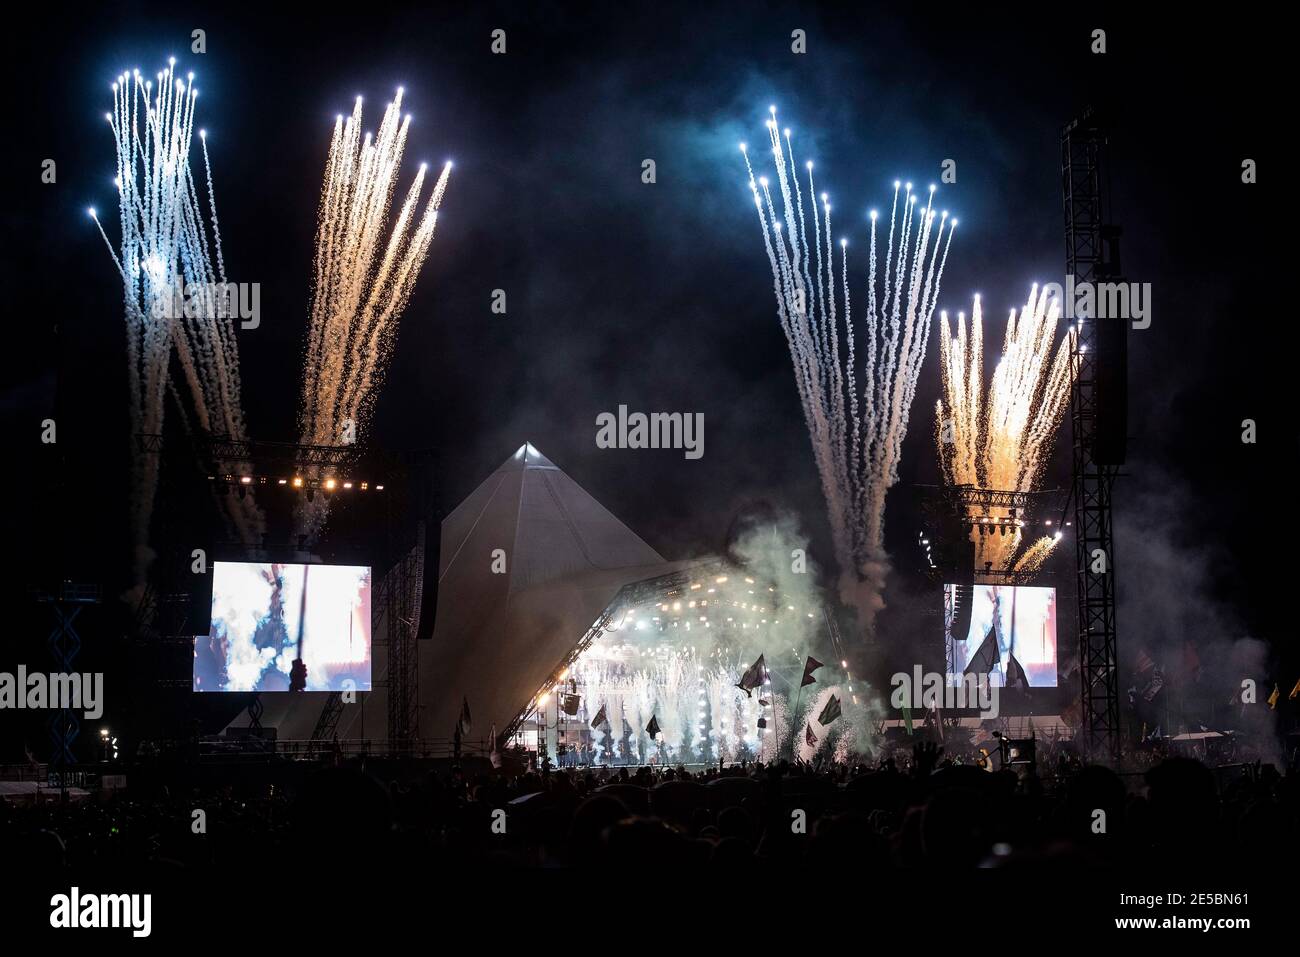 Fireworks launched above the Pyramid stage during Stormzy's set at Glastonbury 2019 Stock Photo